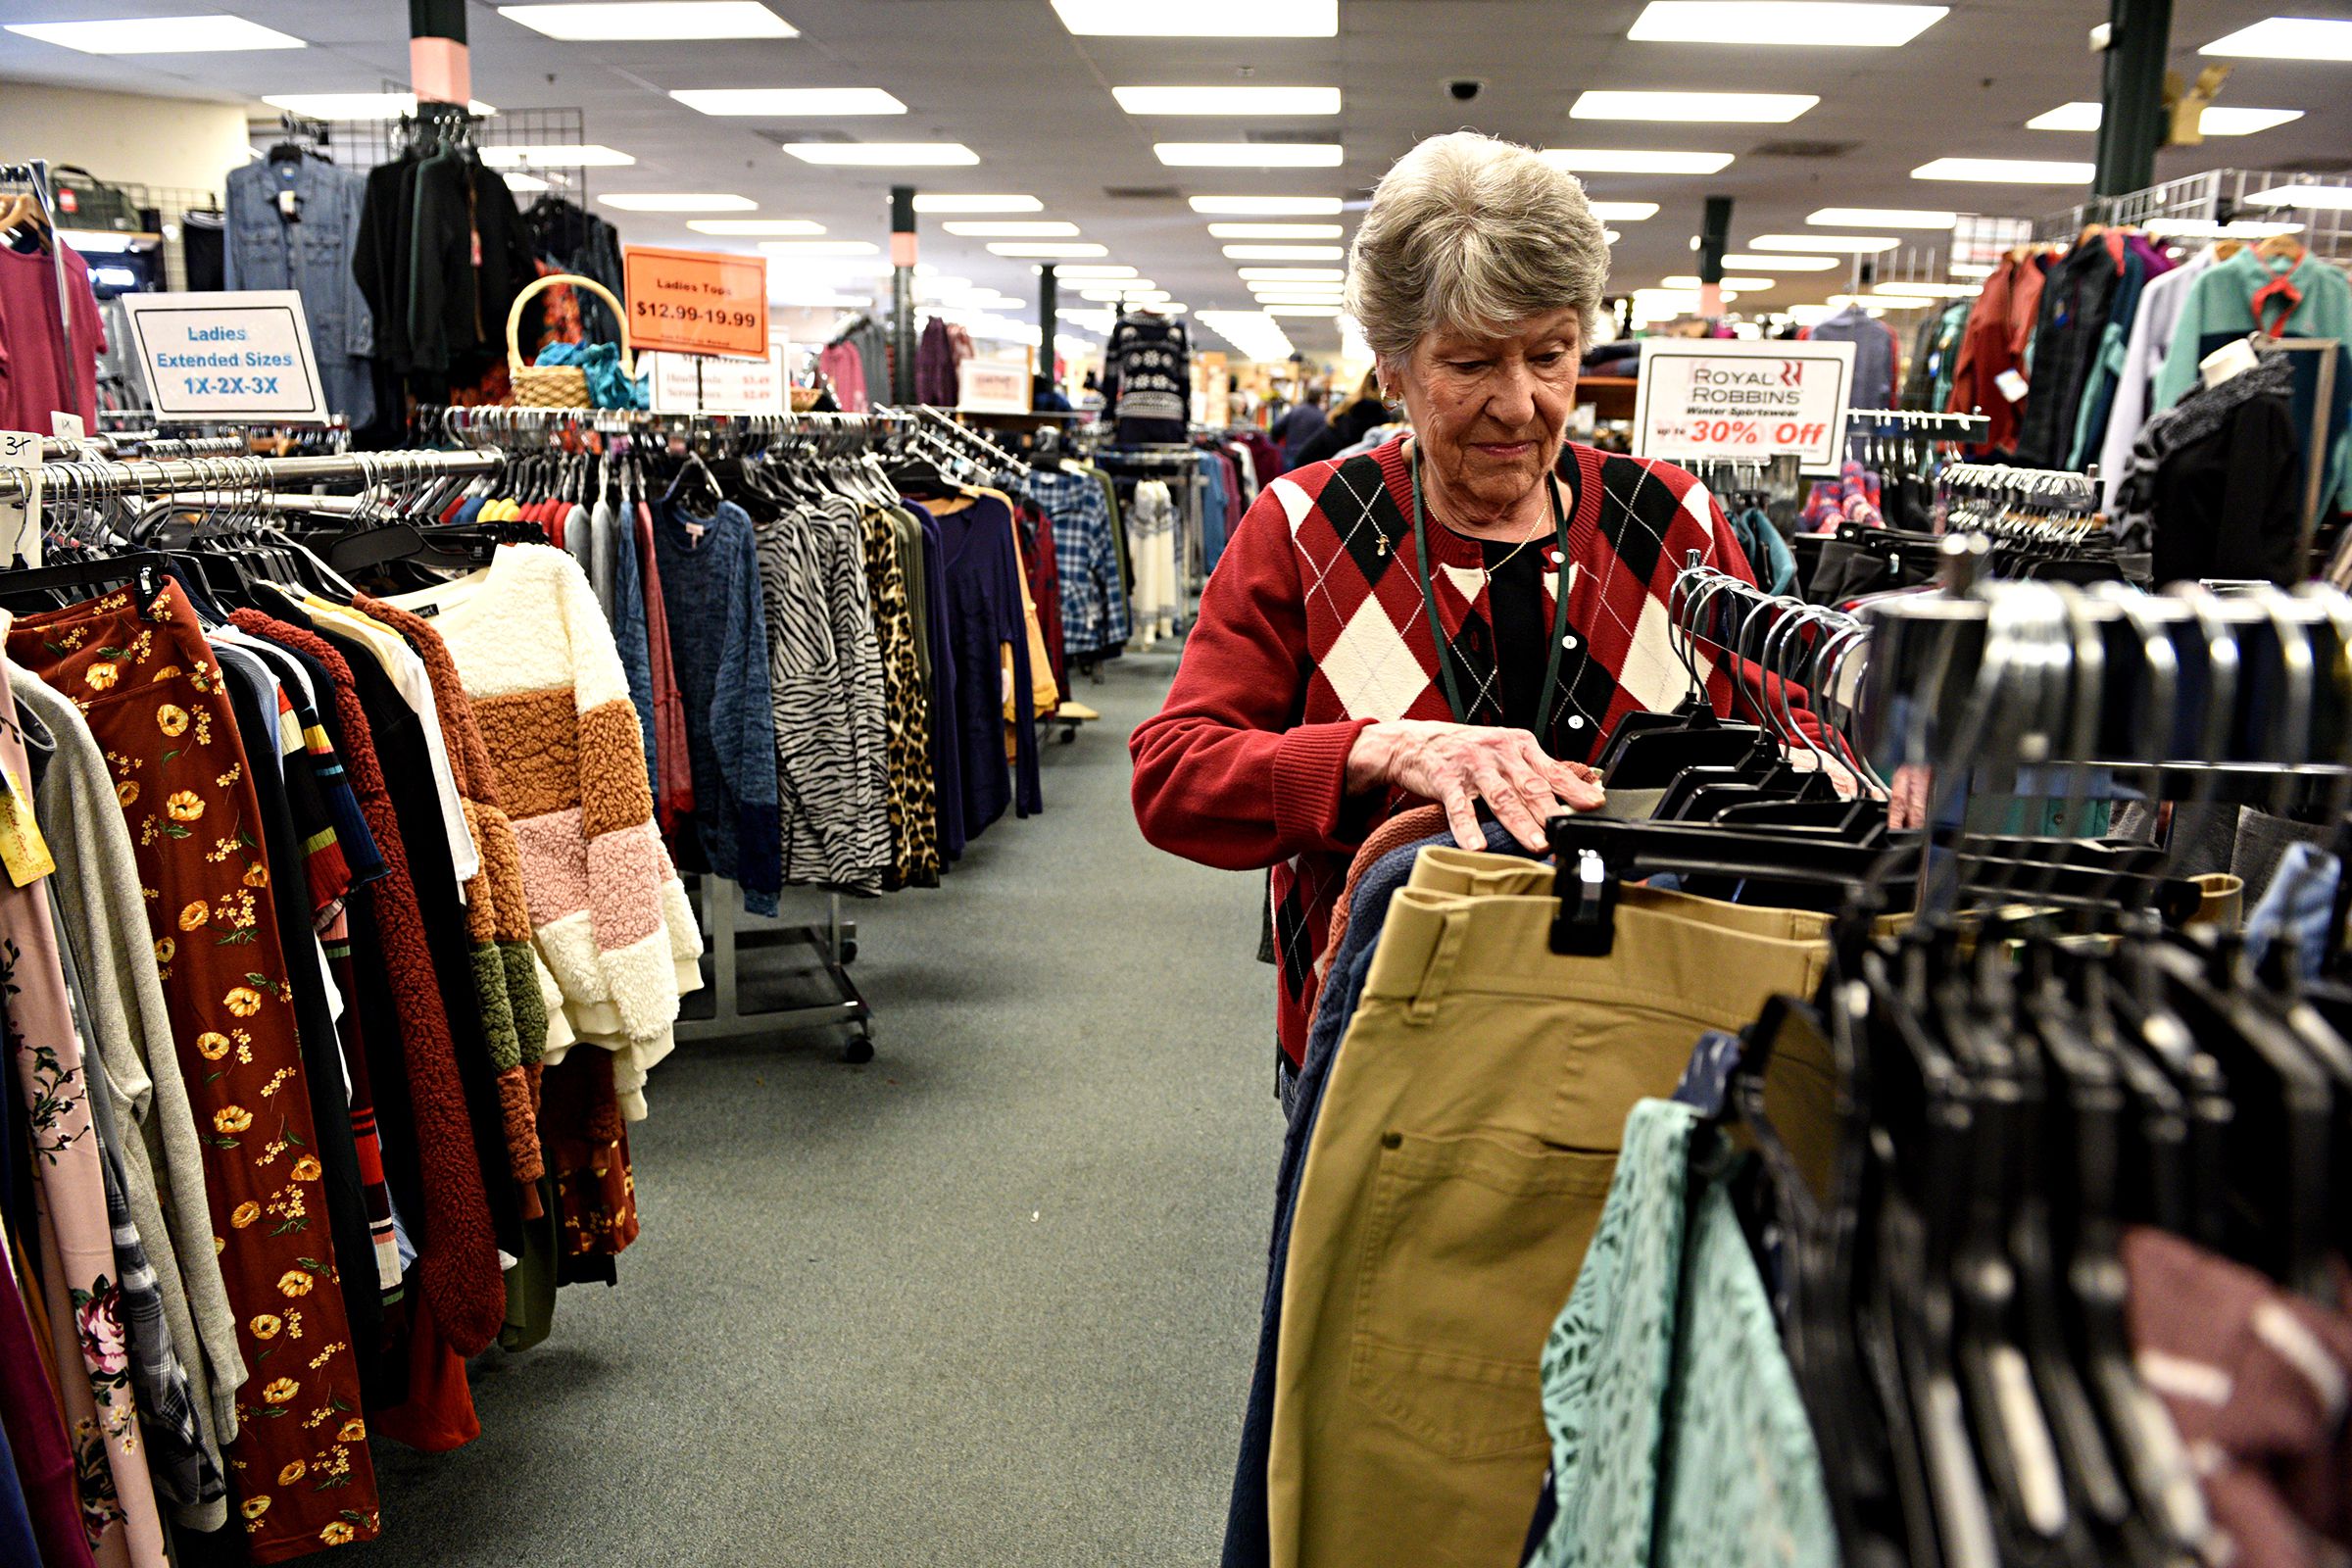 Pauline Robert organizes a clothing rack at Hubert's in Lebanon, N.H., on Saturday, Dec. 28, 2019. Robert has been working at the store for three years. (Valley News - Jennifer Hauck) Copyright Valley News. May not be reprinted or used online without permission. Send requests to permission@vnews.com.